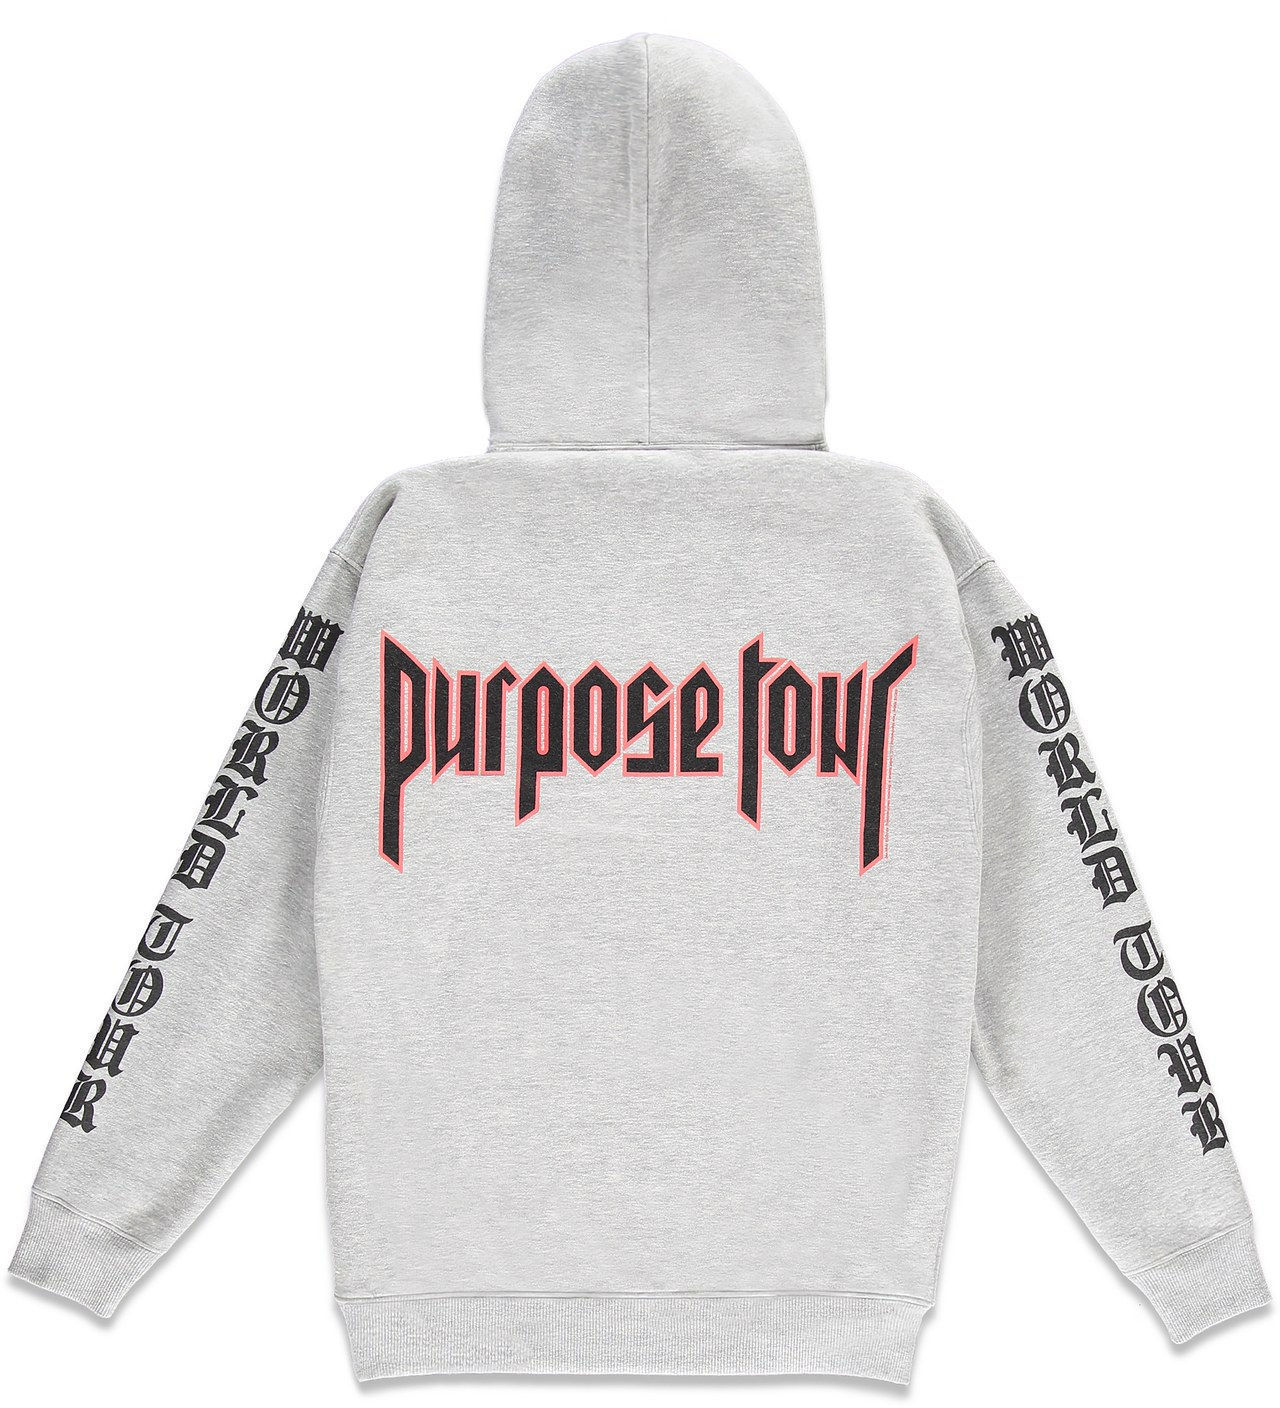 Hoodie, [$25](http://www.forever21.com/Product/Product.aspx?BR=f21&Category=promo-purpose-tour&ProductID=2000231596&VariantID=011)